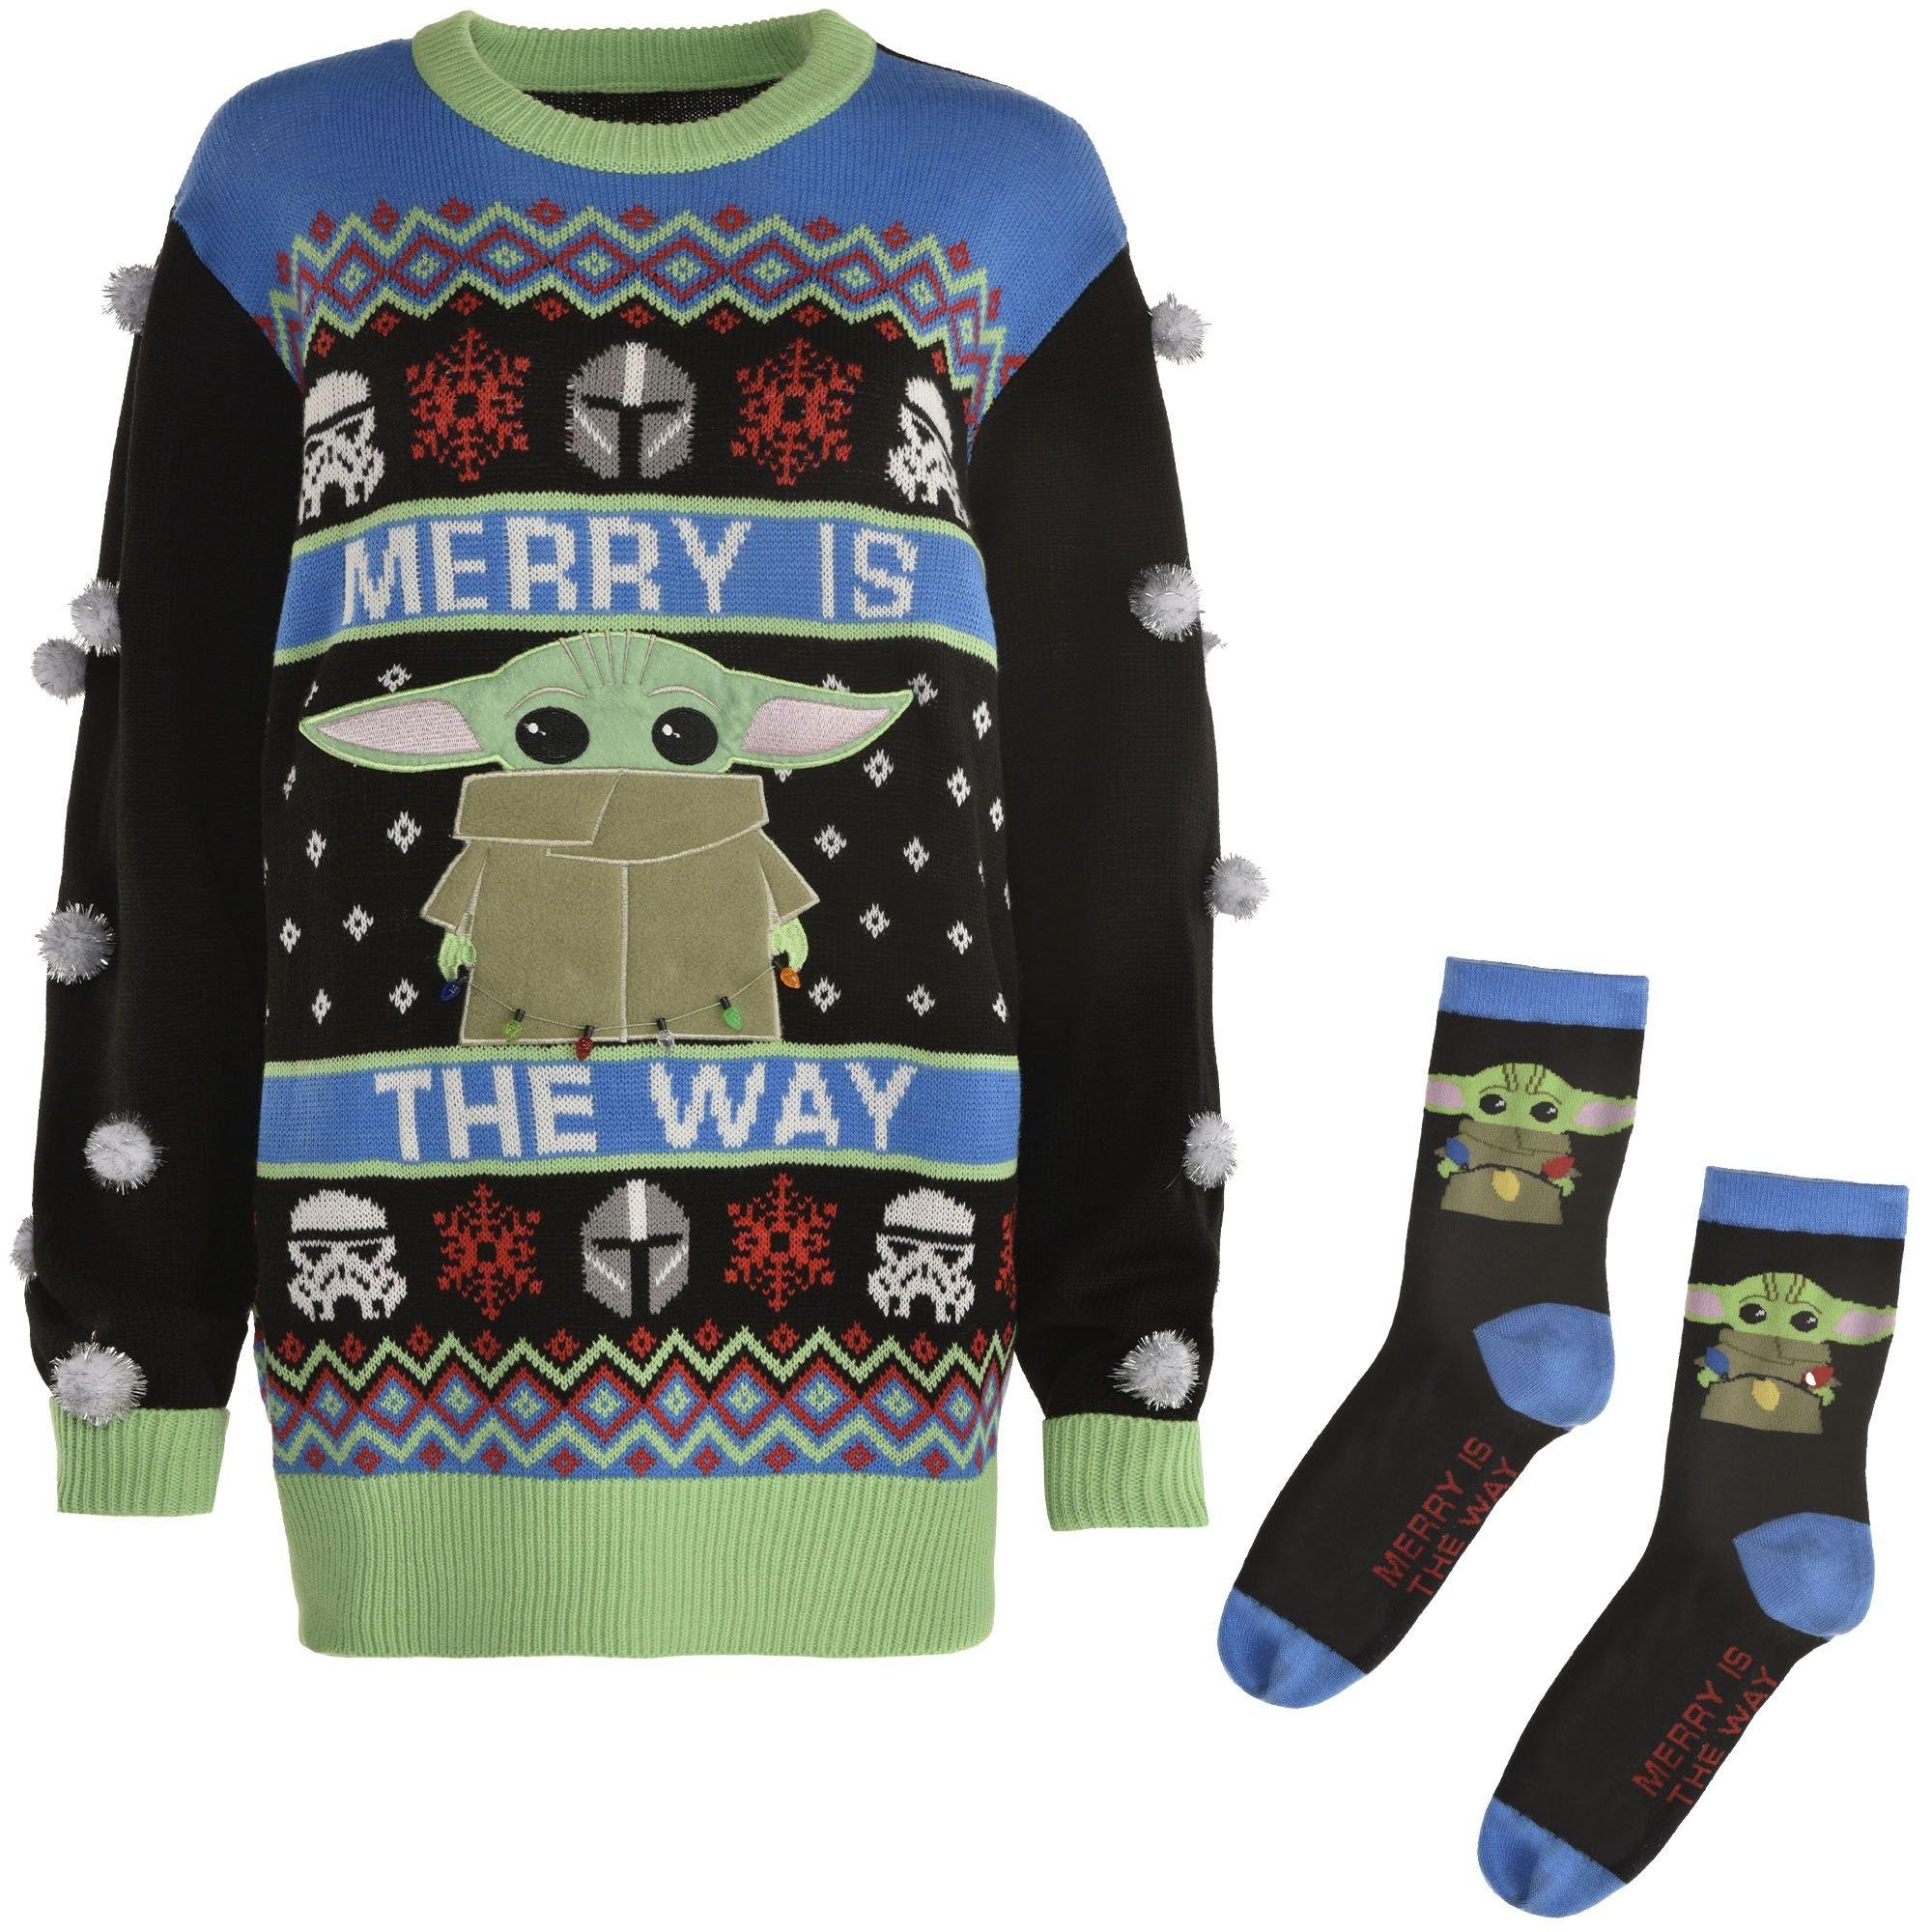 OwlOhh Memphis Grizzlies Baby Yoda Star Wars Sports Football American Ugly Christmas Sweater, Jumper New Trends for Fans Club Gifts Unise